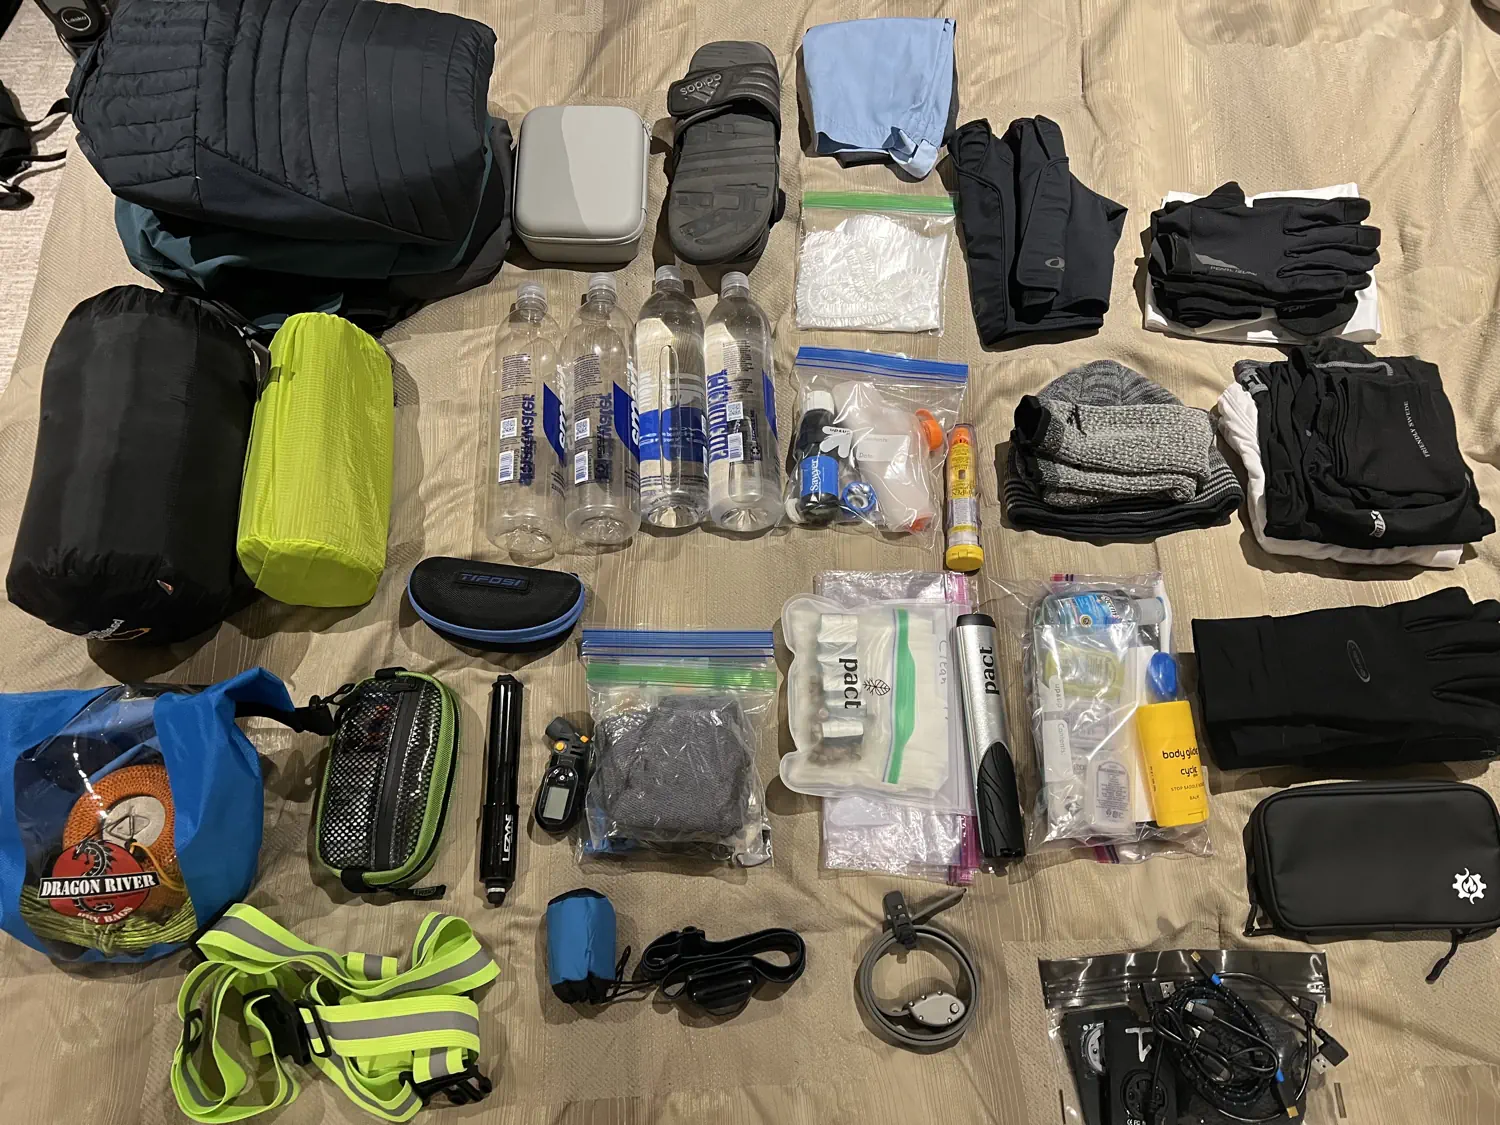 The majority of Keith's gear that he will be carrying during the 2024 Tour Divide